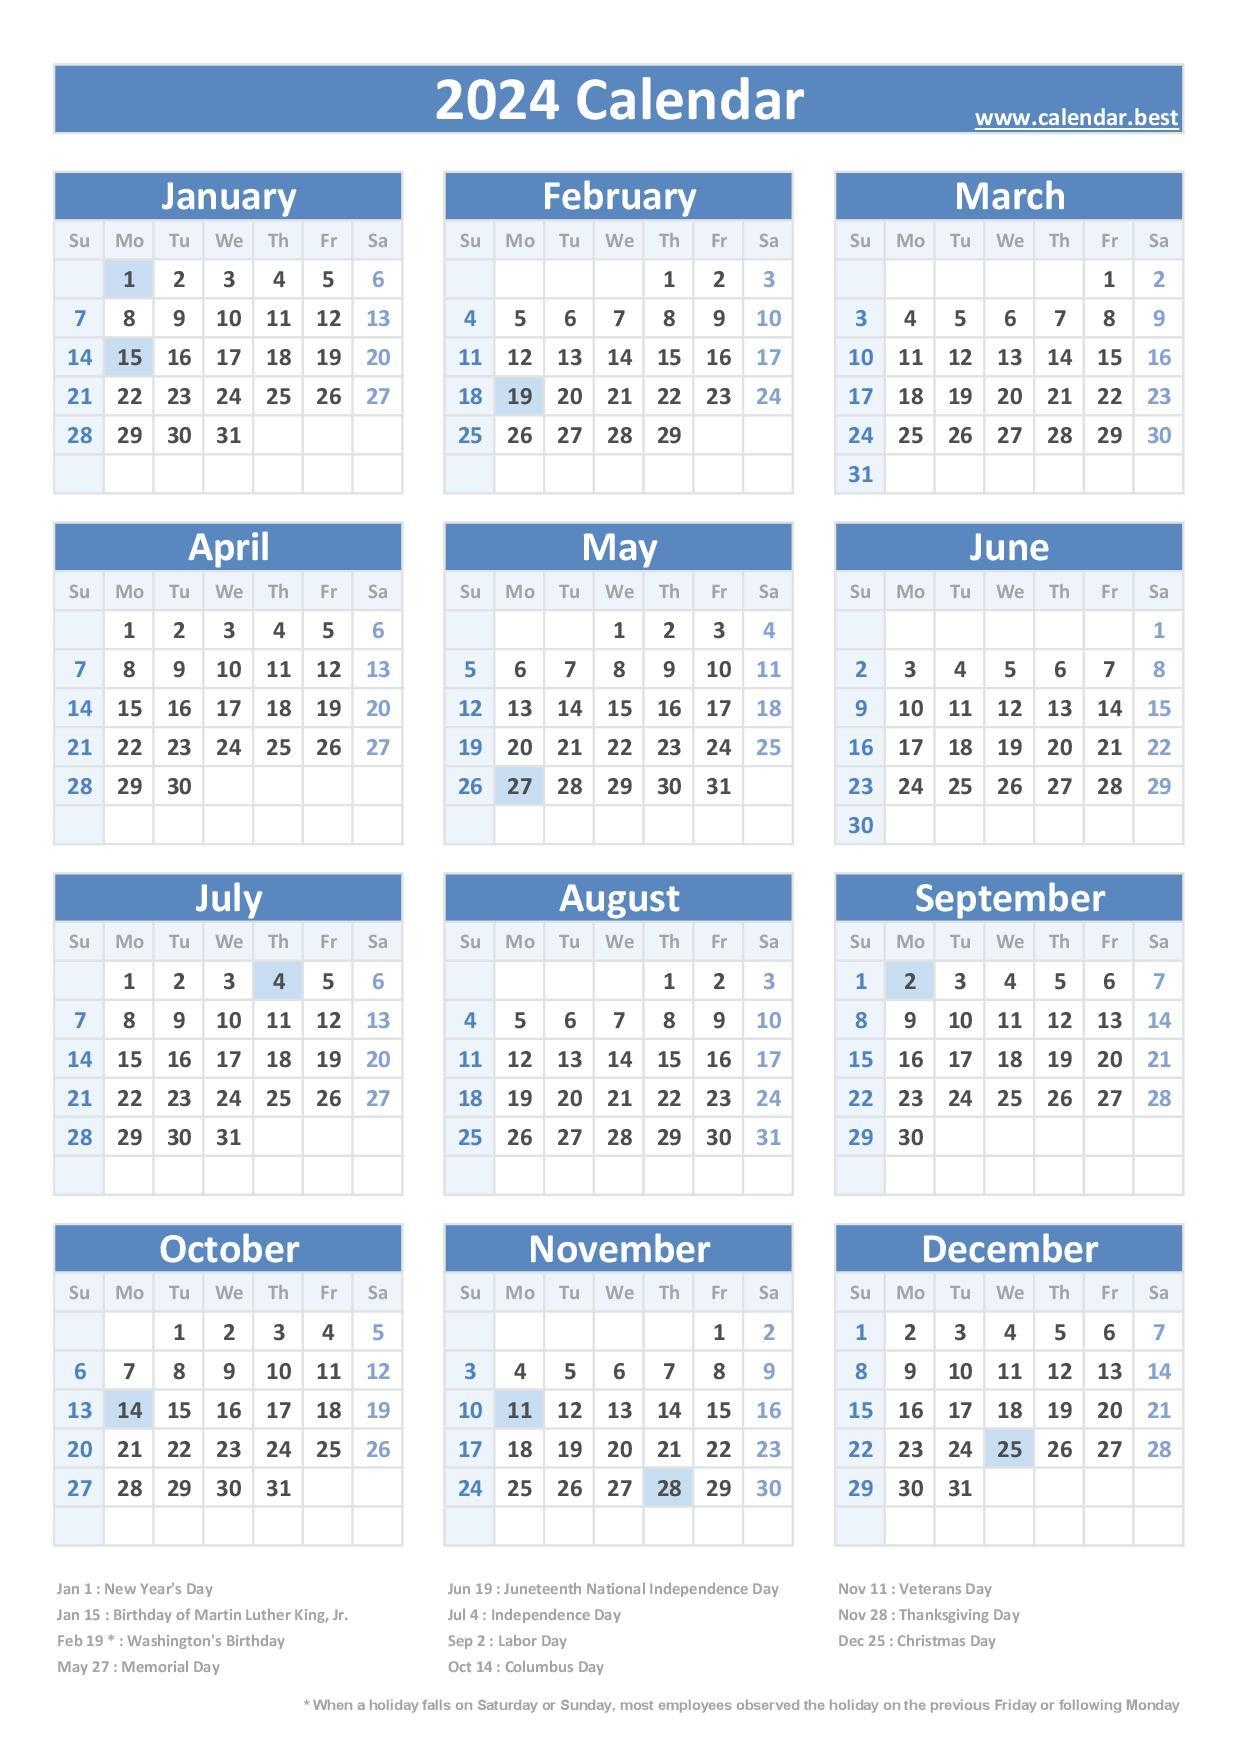 2024 Calendar With Holidays (Us Federal Holidays) for Free Printable Calendar 2024 With Us Holidays